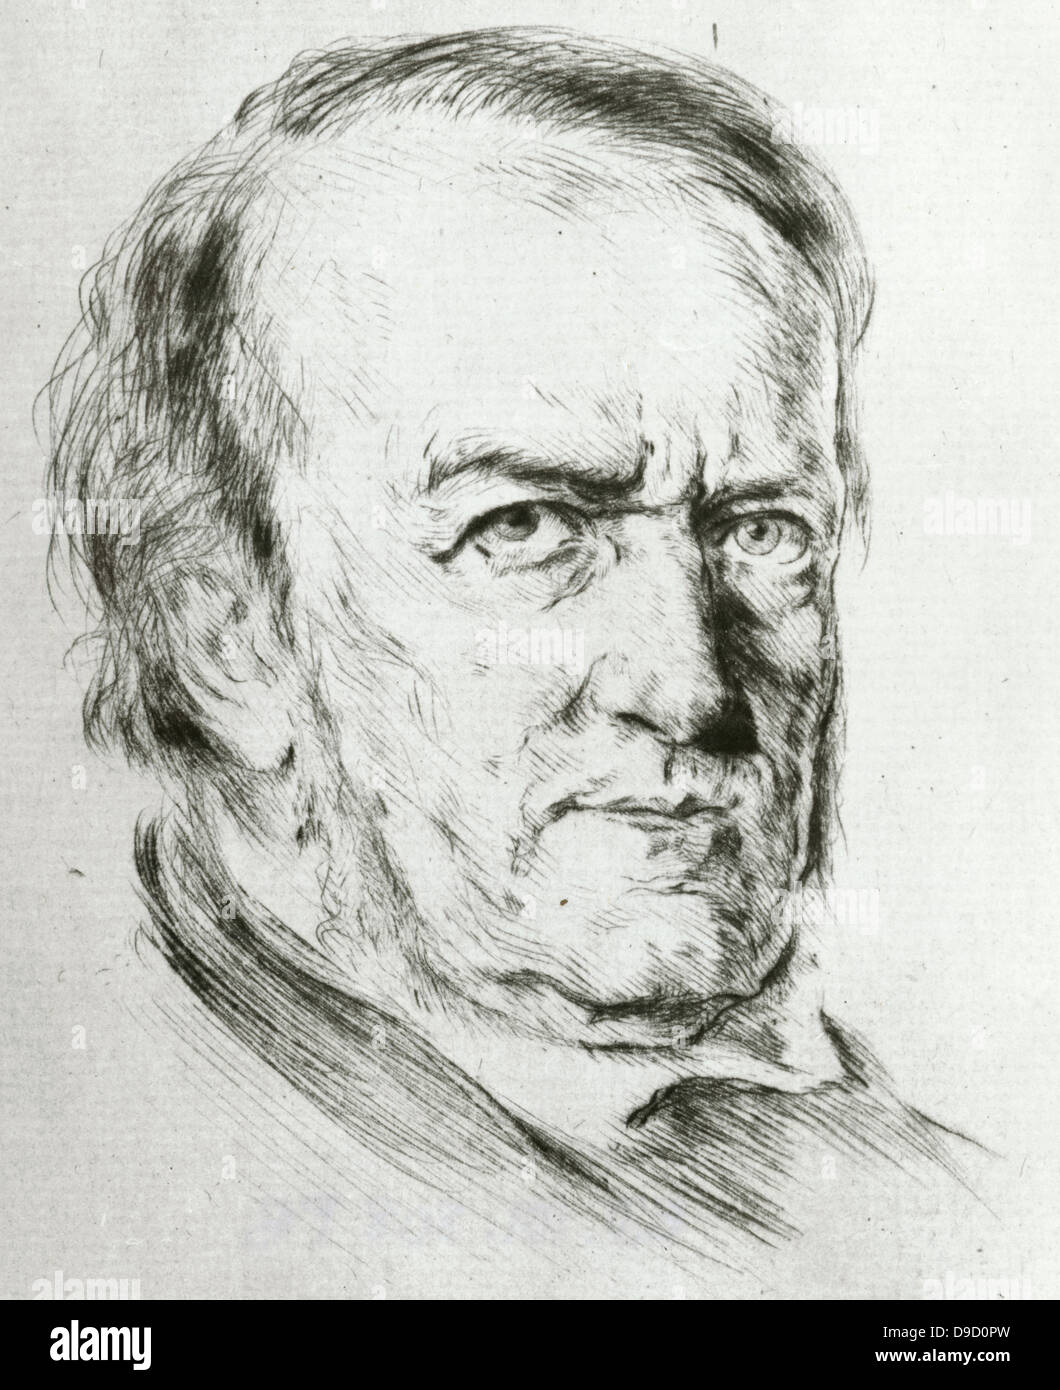 (Wilhelm) Richard Wagner (1813-1883) German composer, conductor, and theatre director. He built the Bayreuth Festspielhaus which opend in 1876 with Das Rheingold to stage his music dramas. Stock Photo